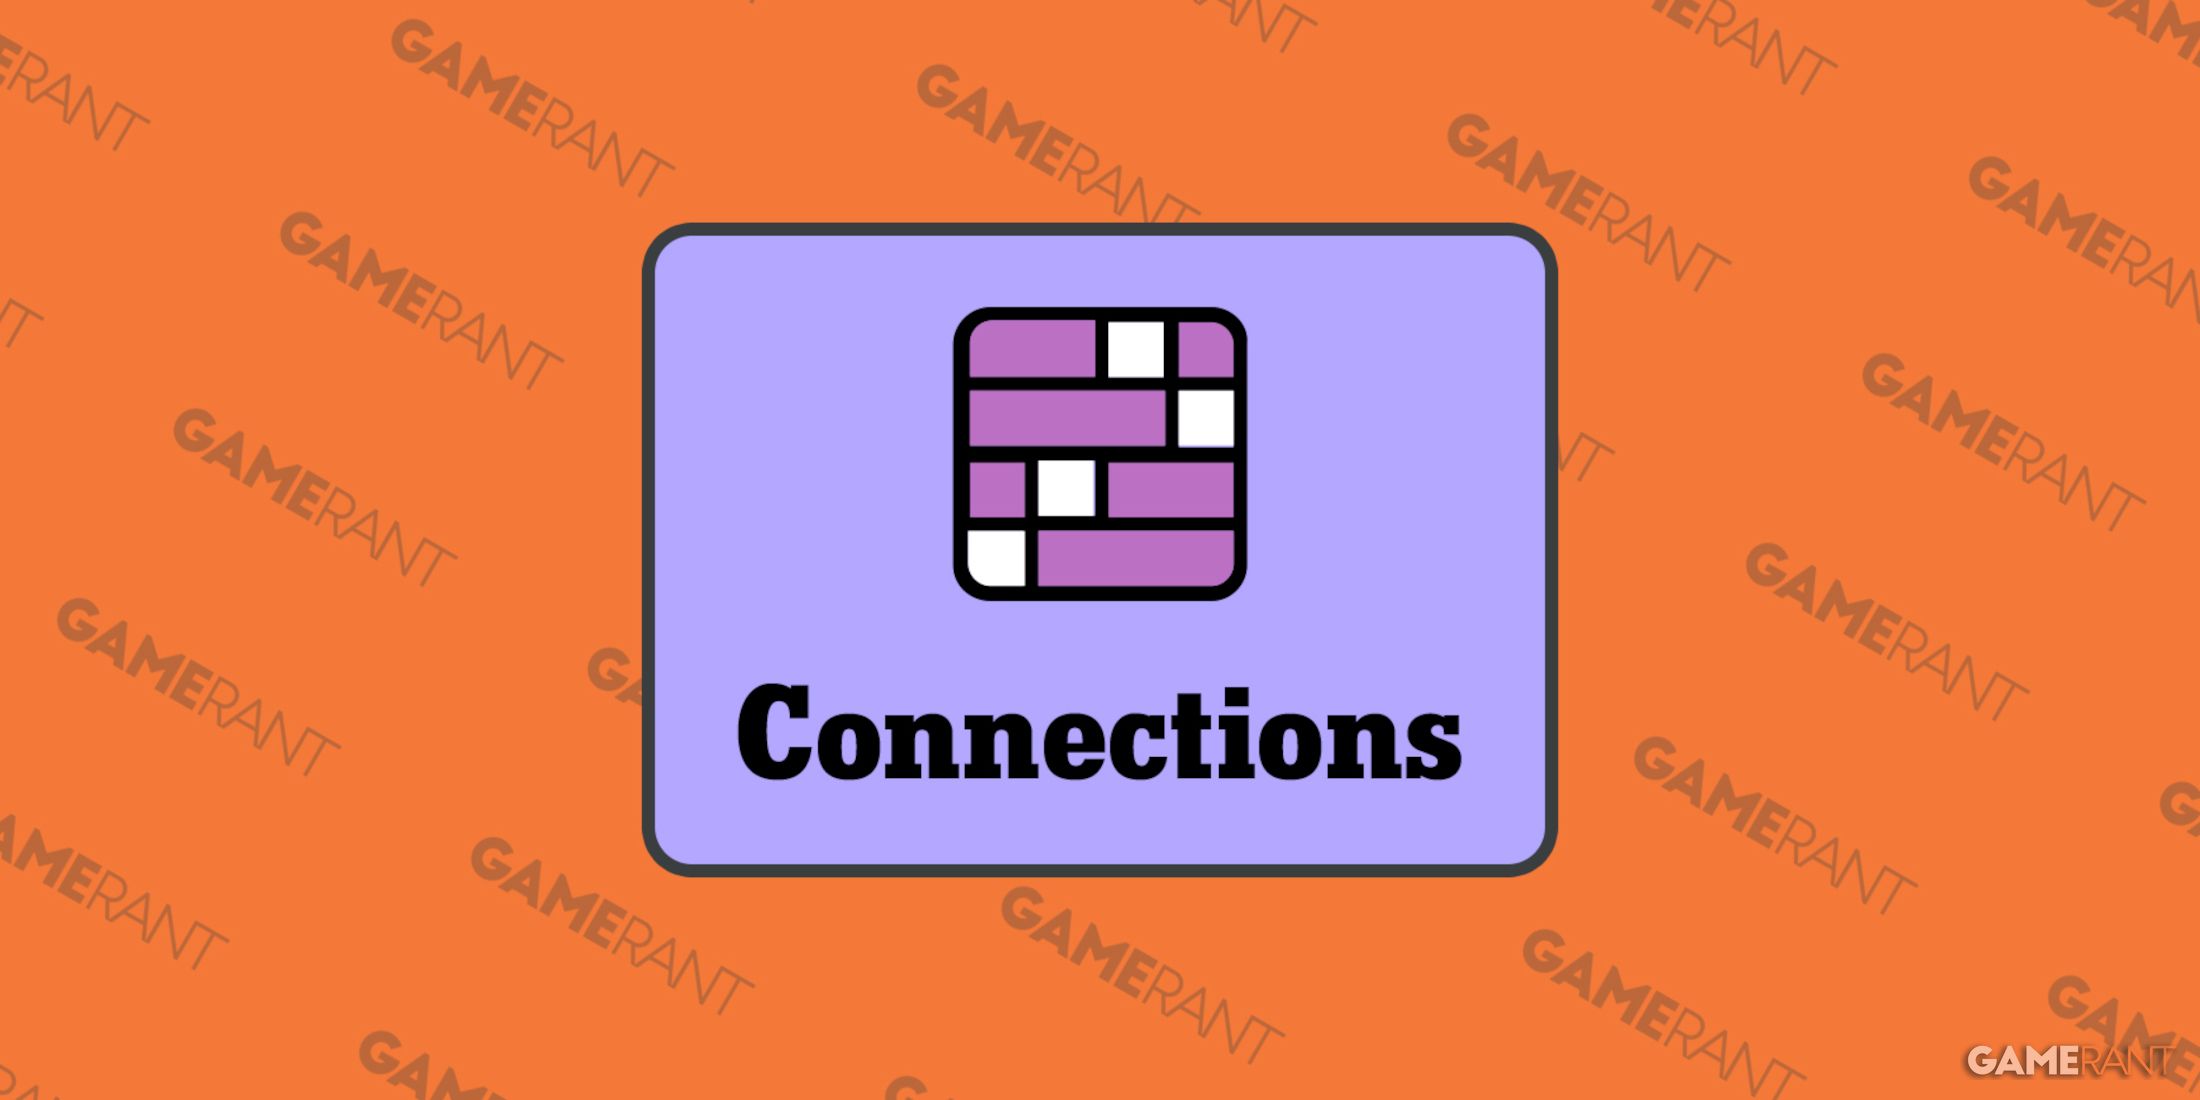 New York Times Connections logo in front of an orange background